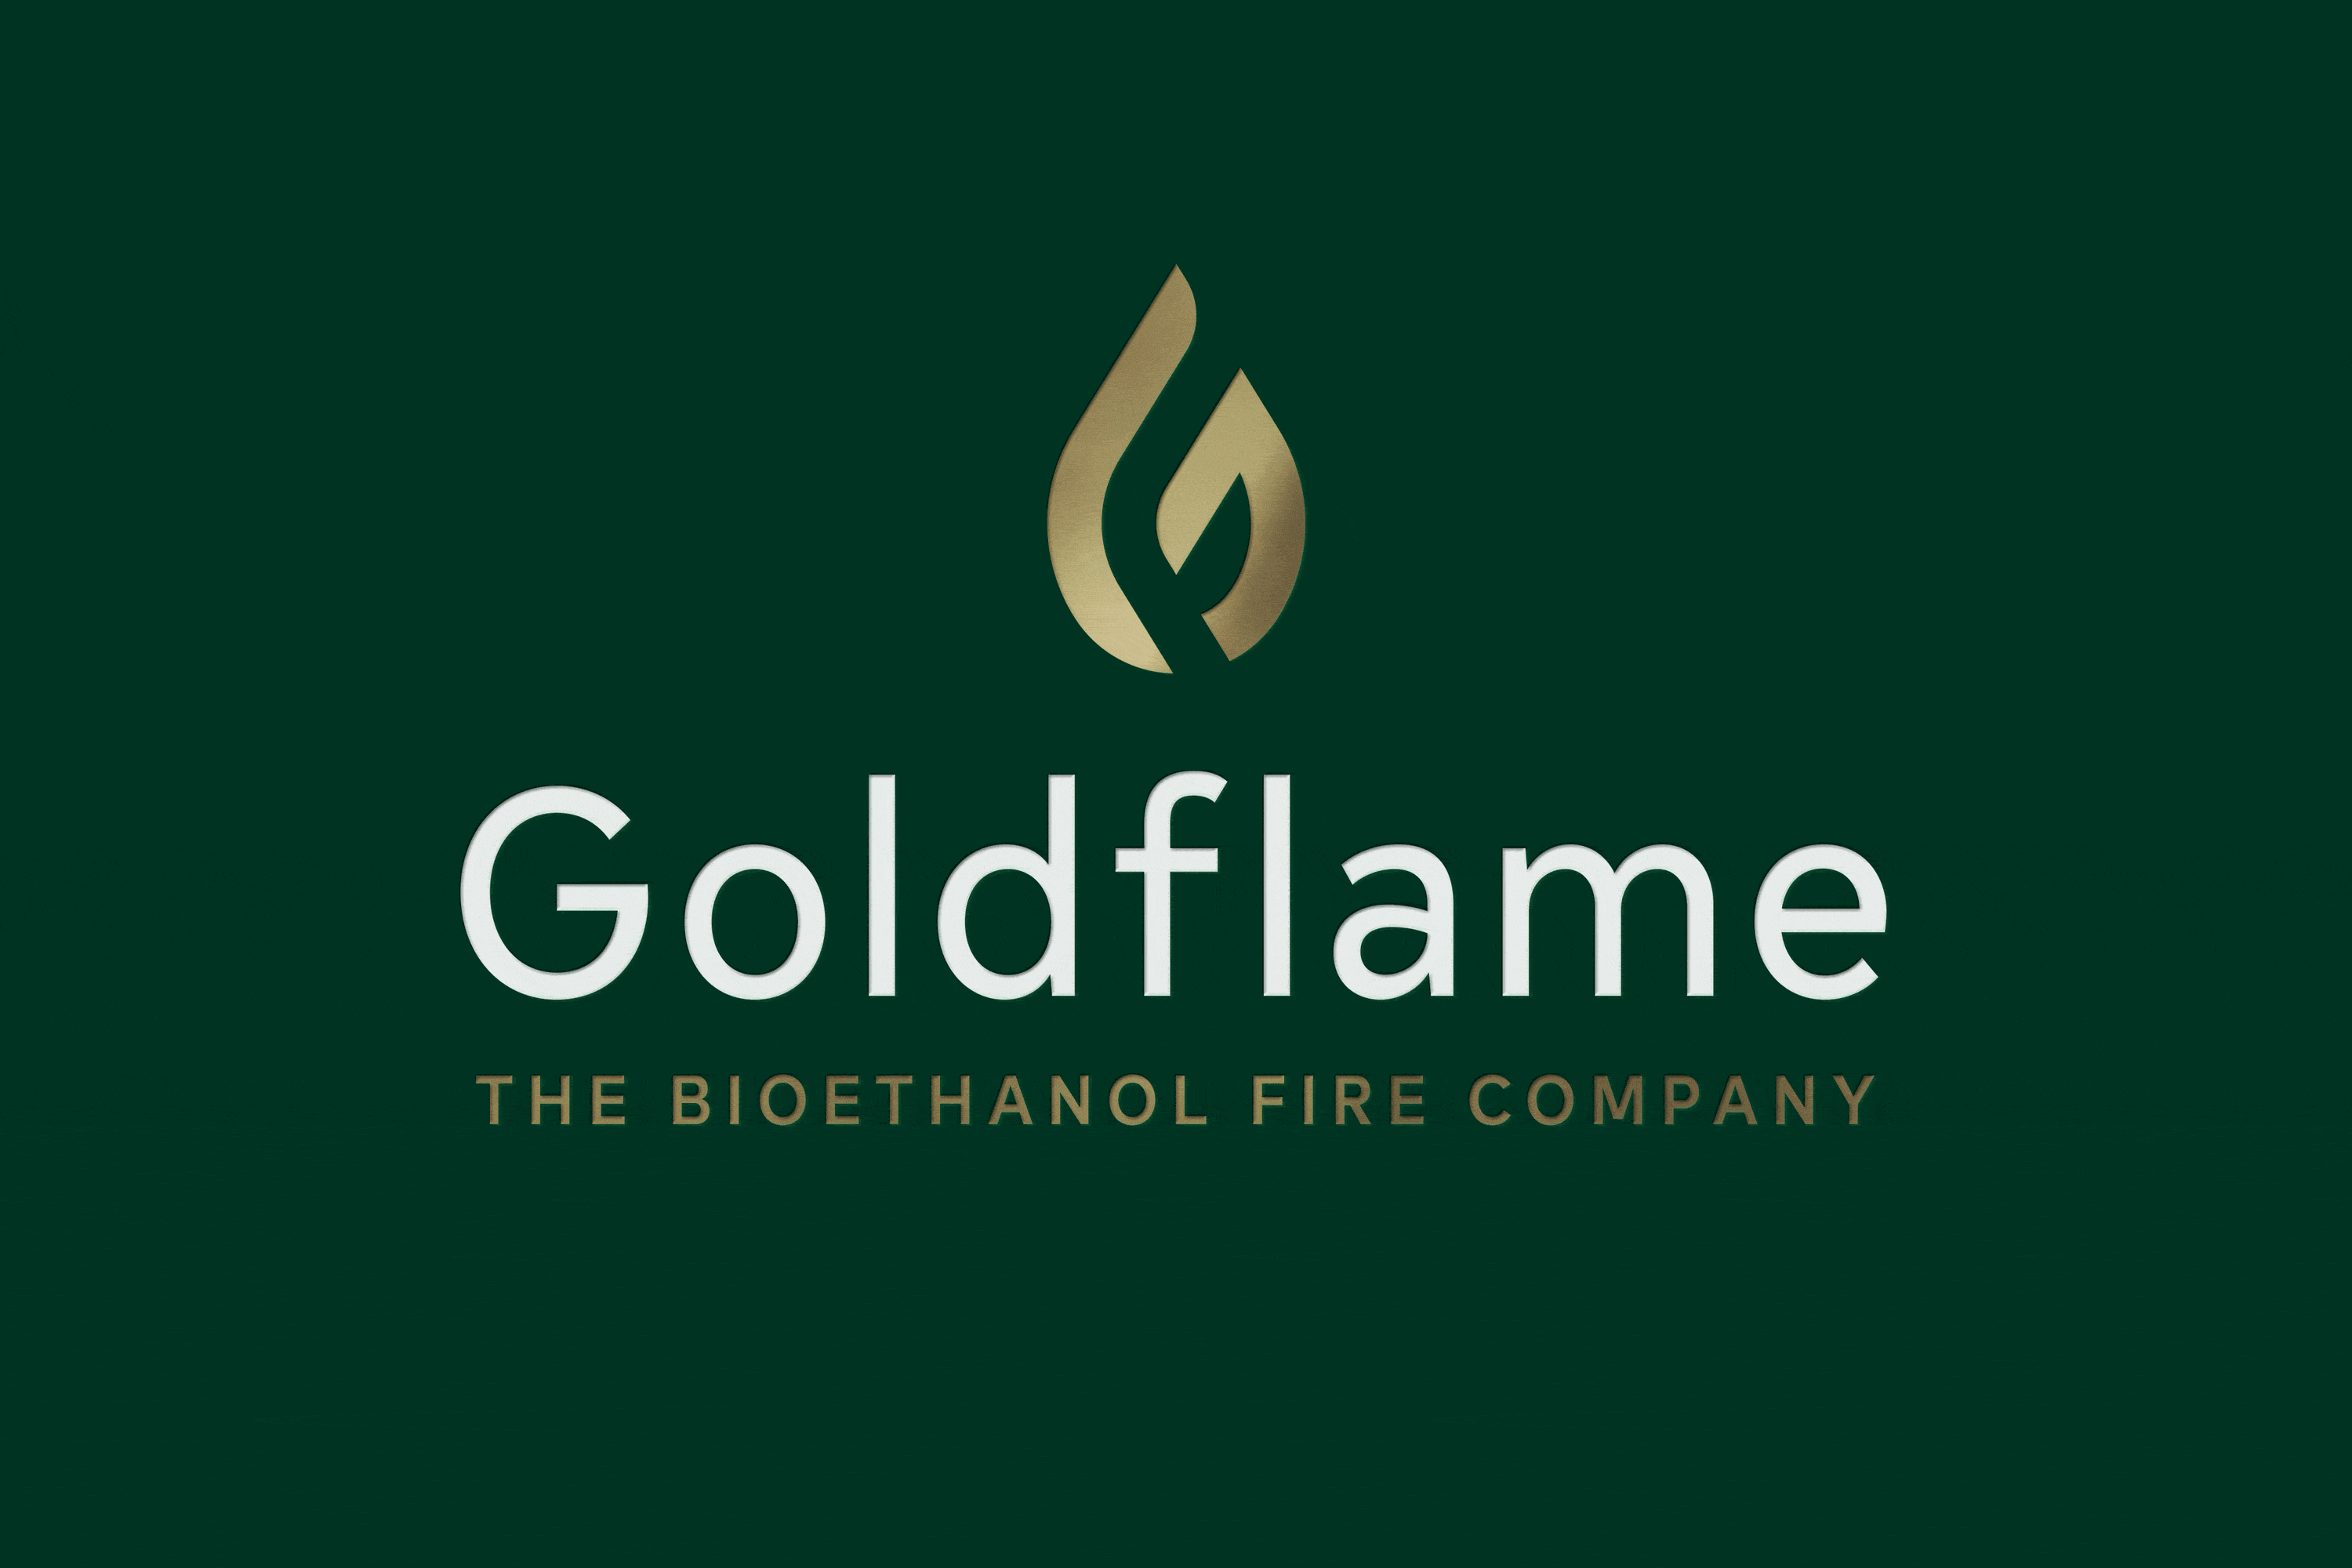 Gold Flame Logo - Goldflame. The Bioethanol Fire Company